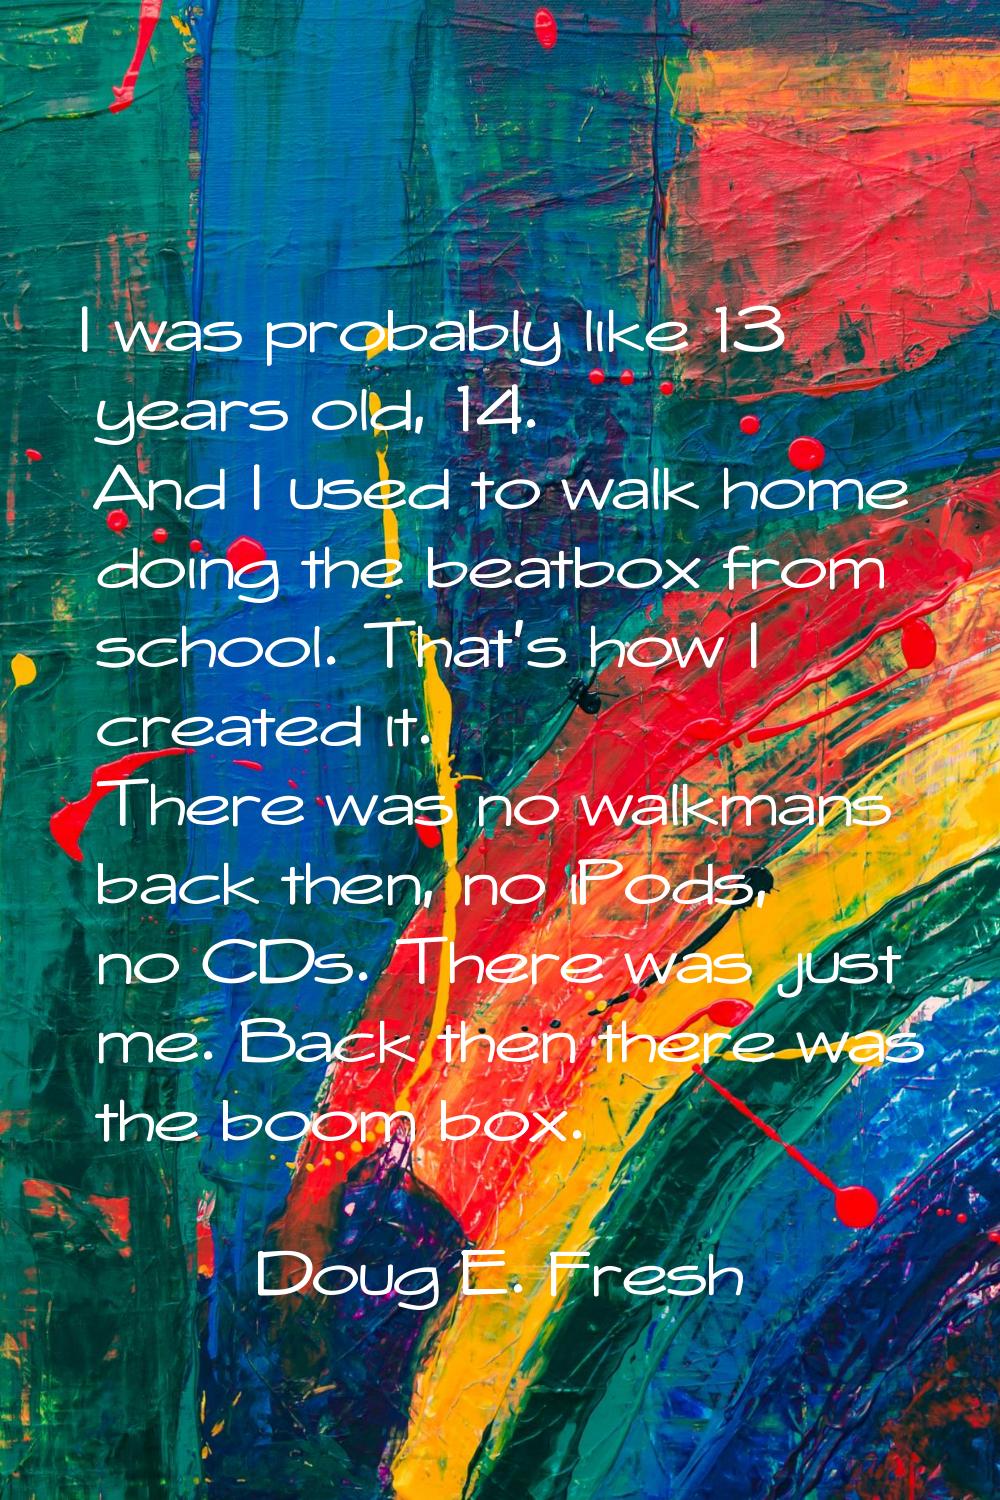 I was probably like 13 years old, 14. And I used to walk home doing the beatbox from school. That's